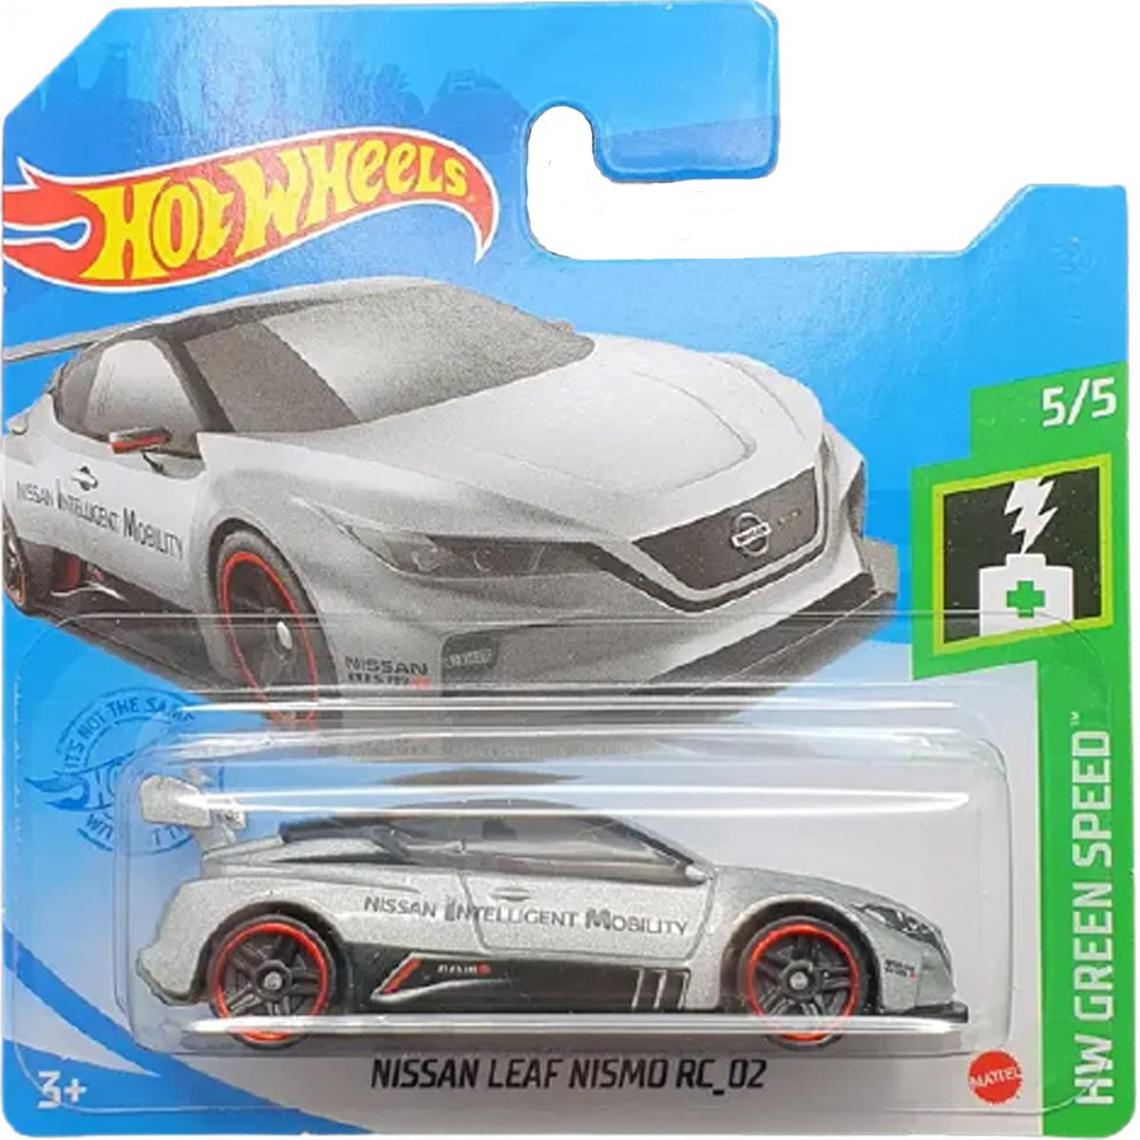 Hot Wheels - véhicule Nissan Leaf Nismo RC_02 HW Green Speed 5/5 - Voiture de collection miniature